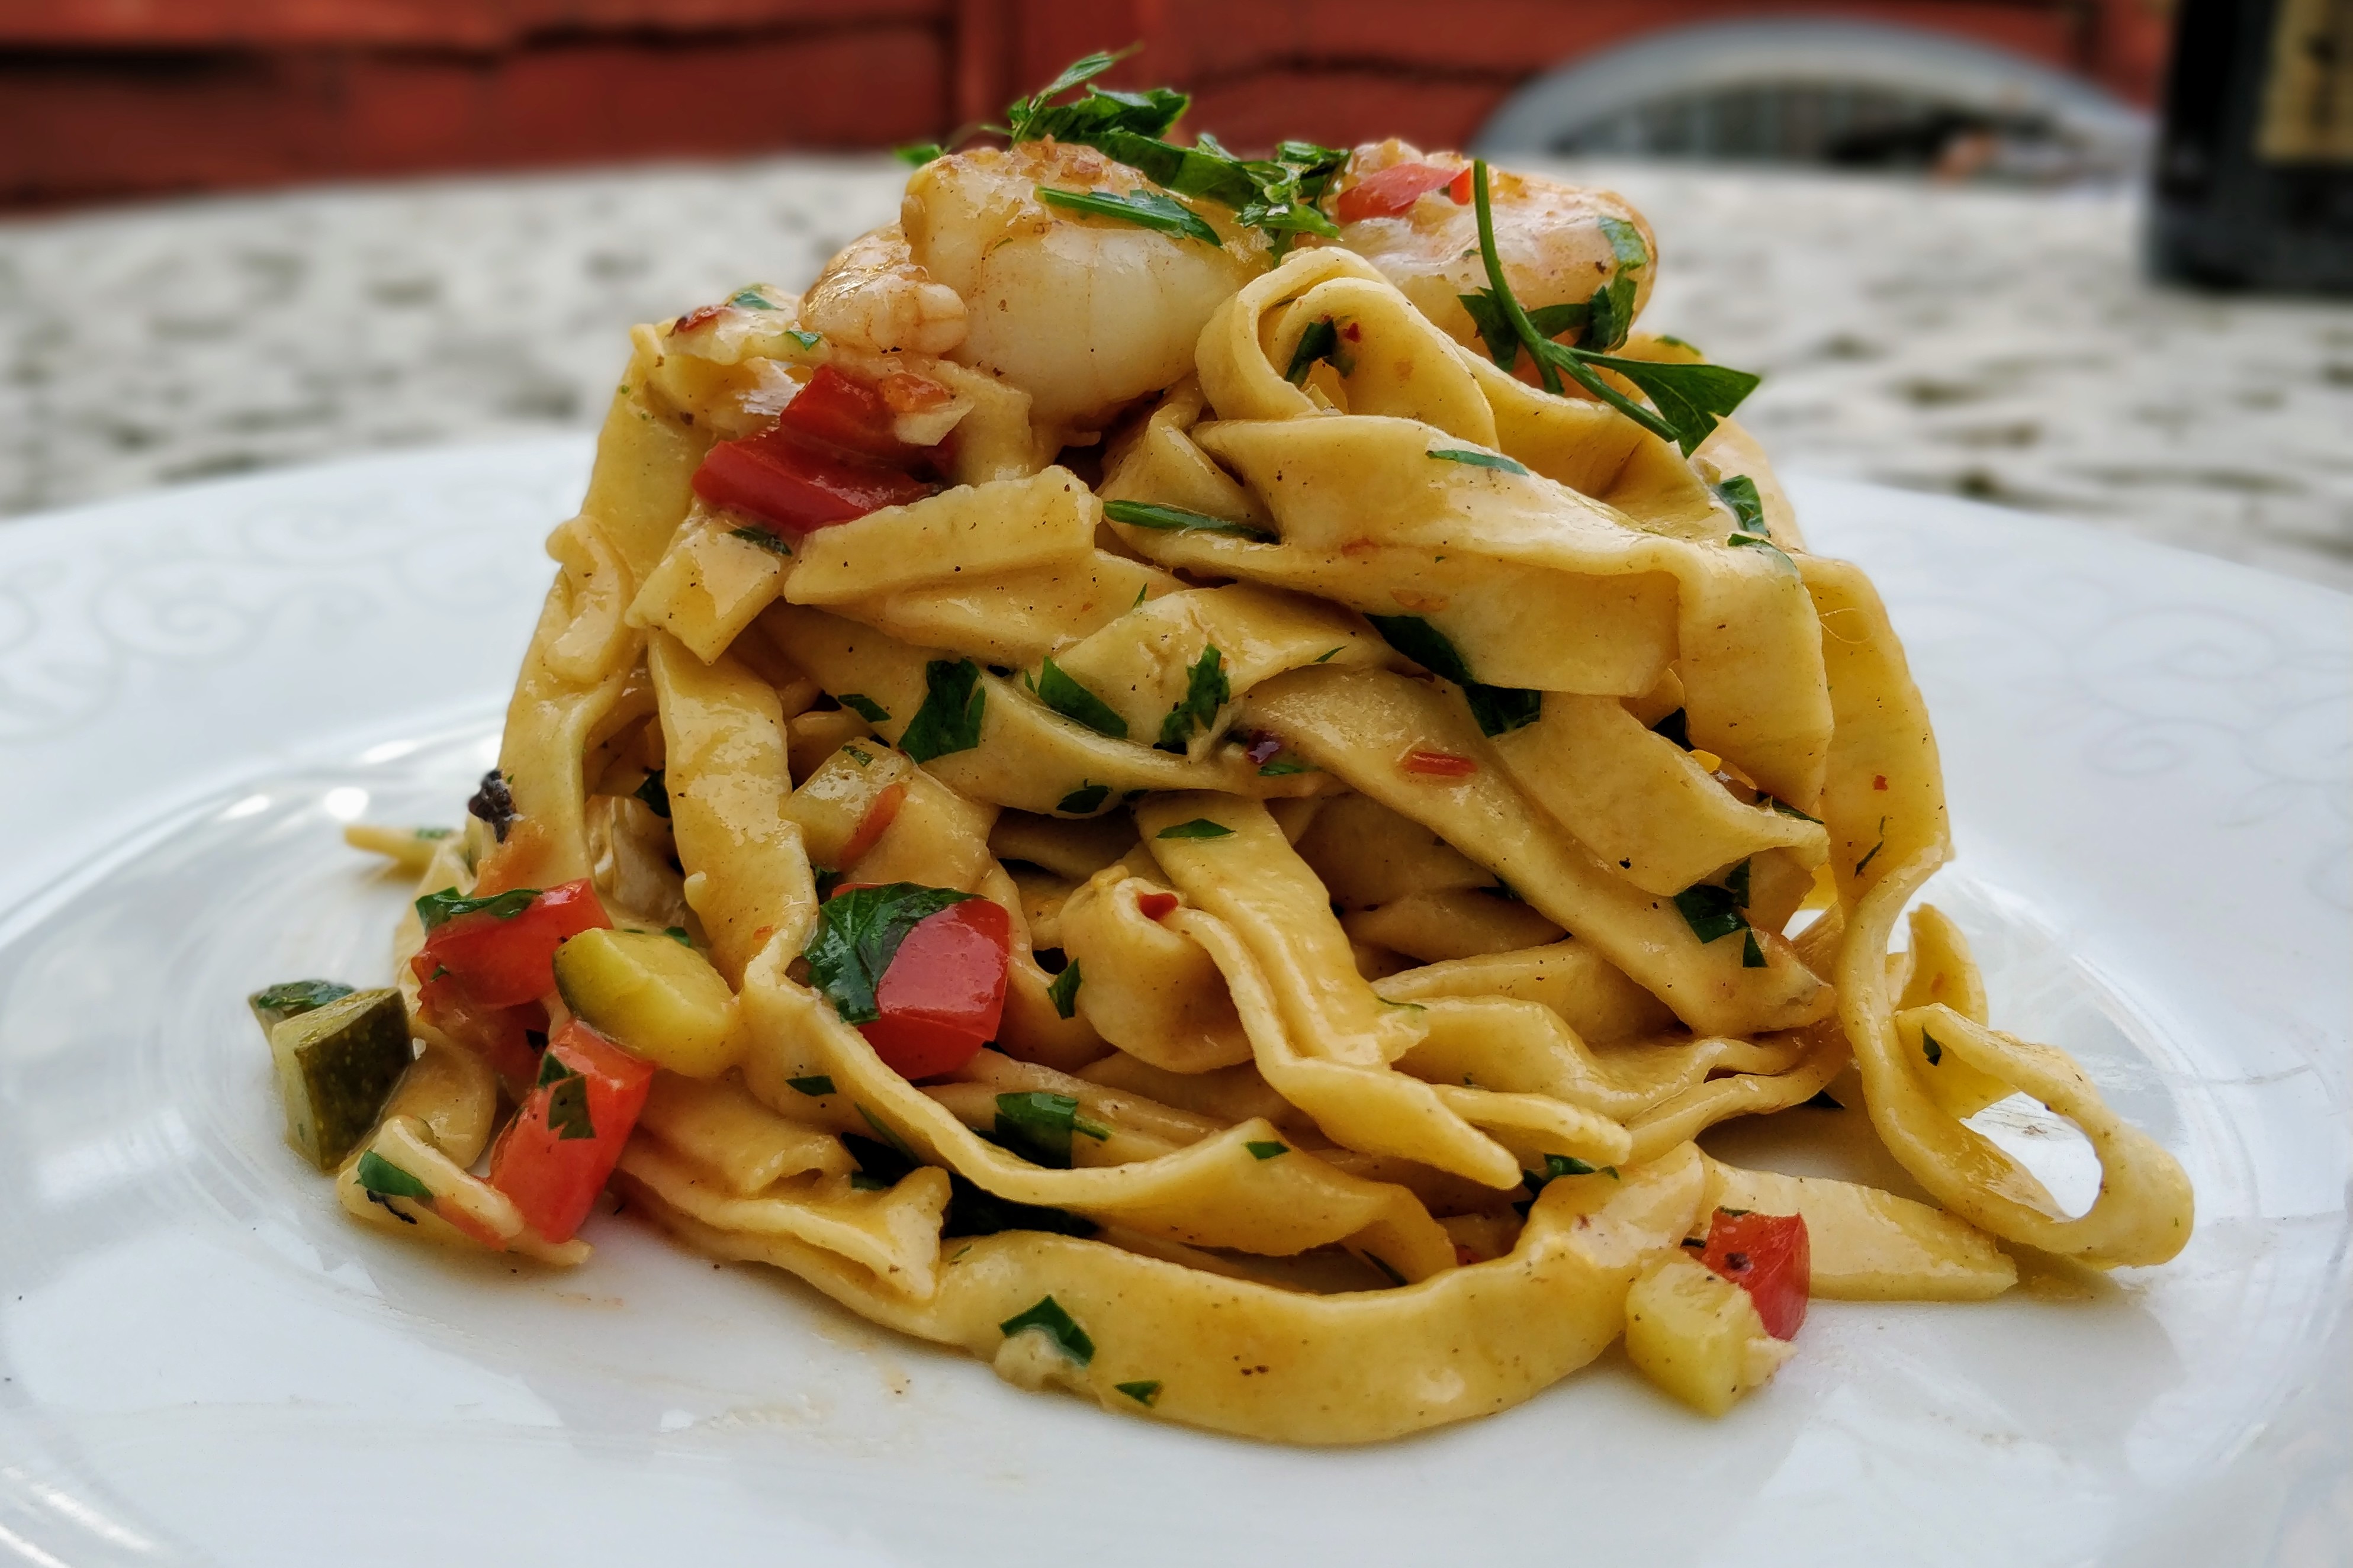 Tagliatelle with prawns in a white wine, butter and lemon
sauce